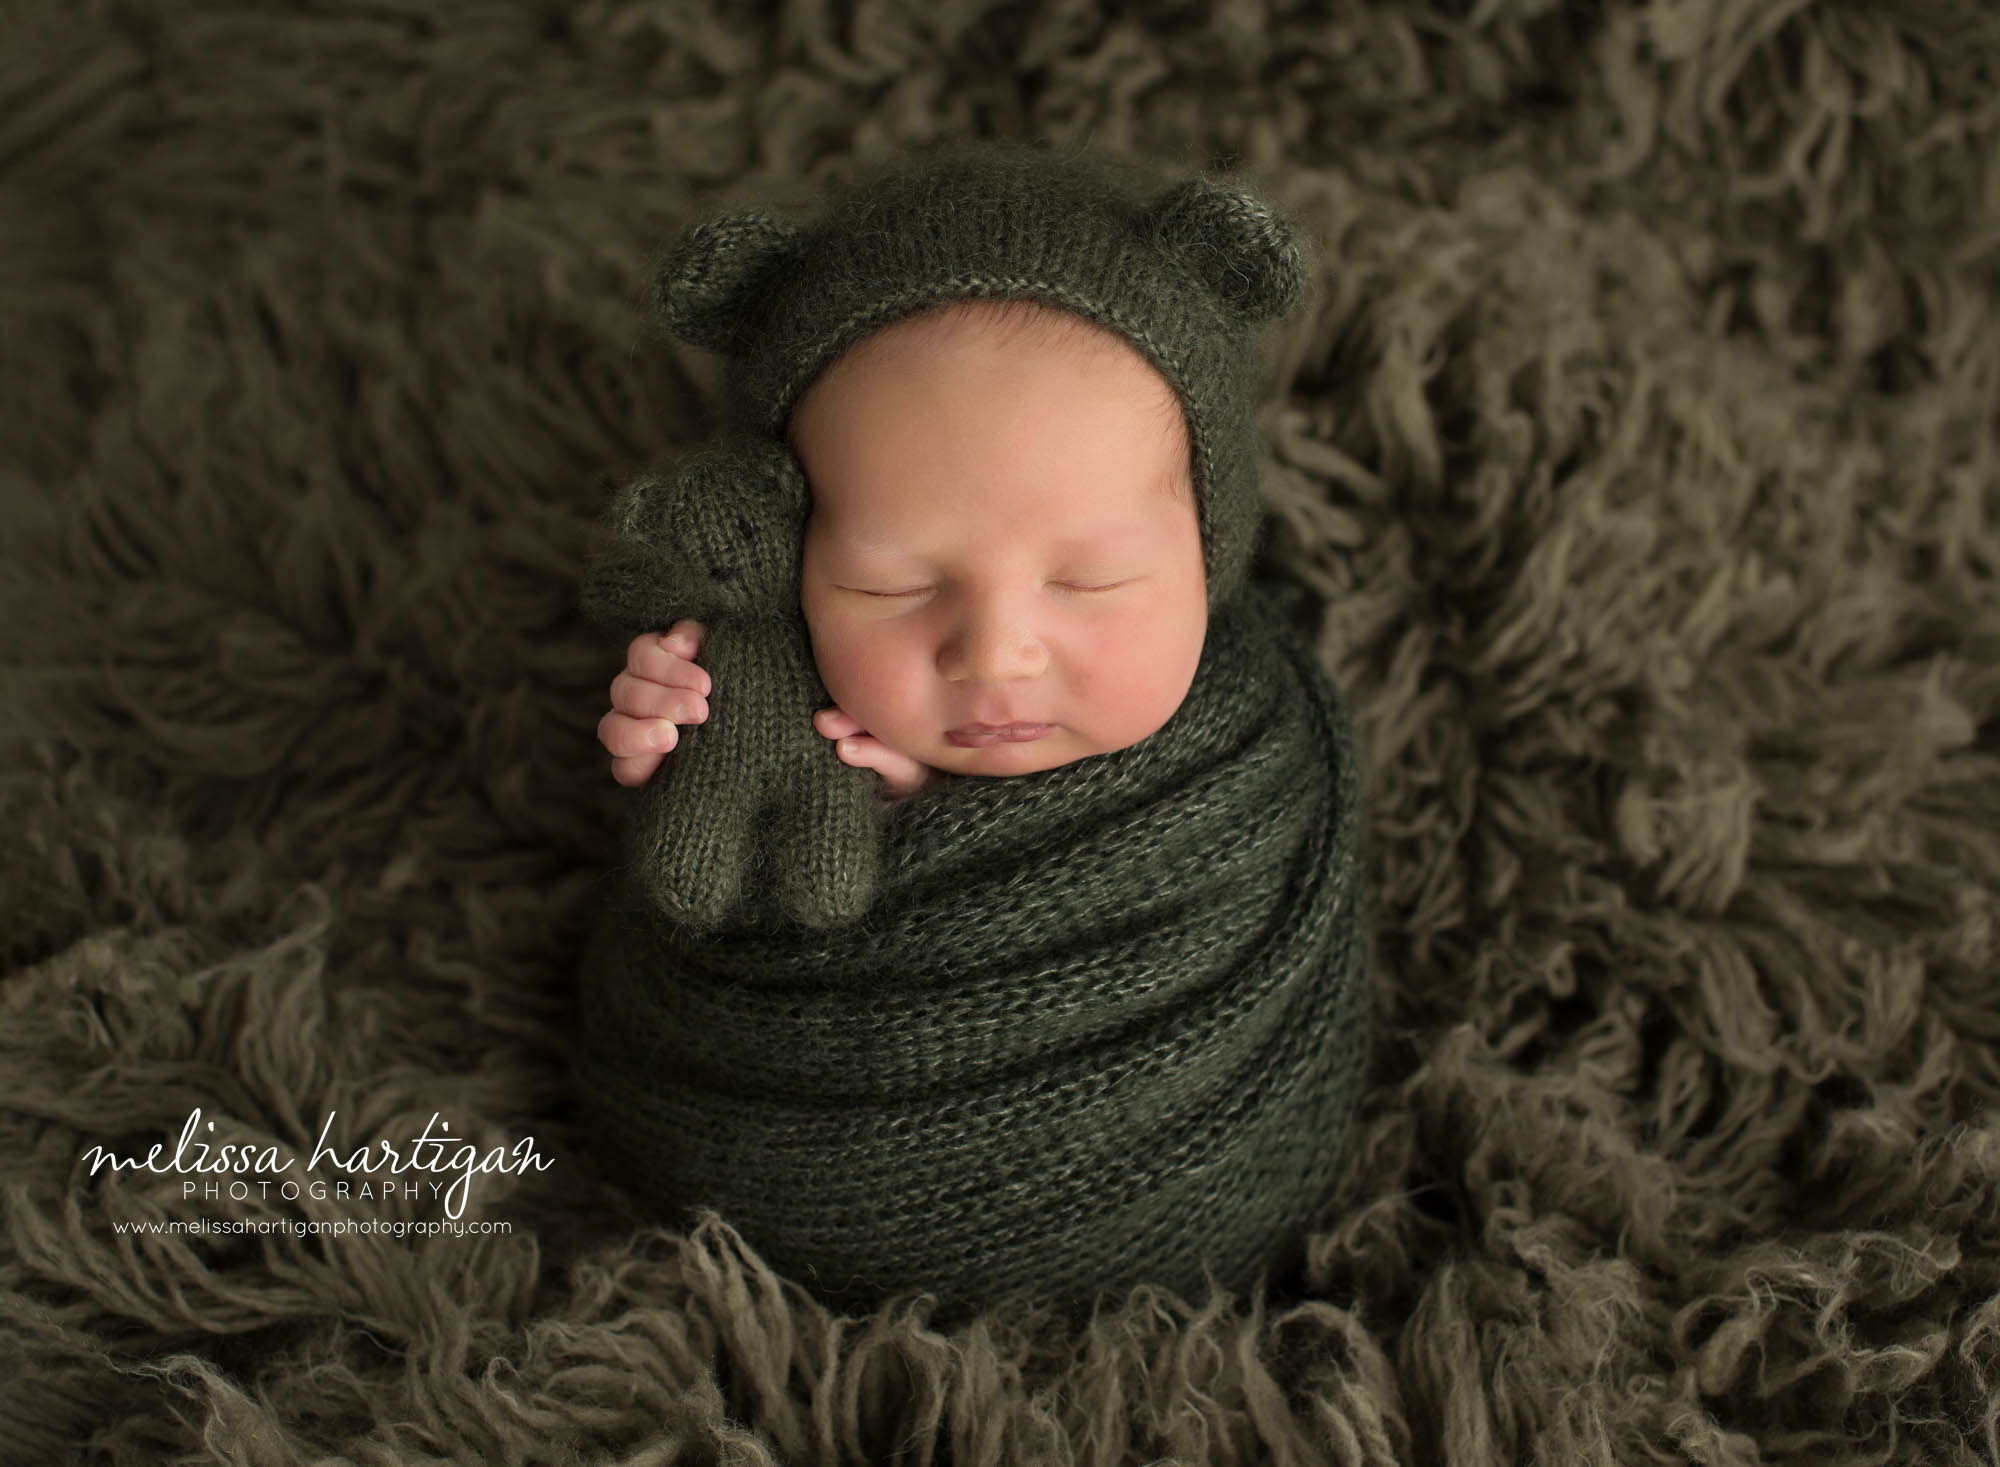 newborn baby boy wrappe din dark green knitted wrap posed on green flokati wearing knitted bear bonnet holding matching knitted teddy bear Newborn photography CT